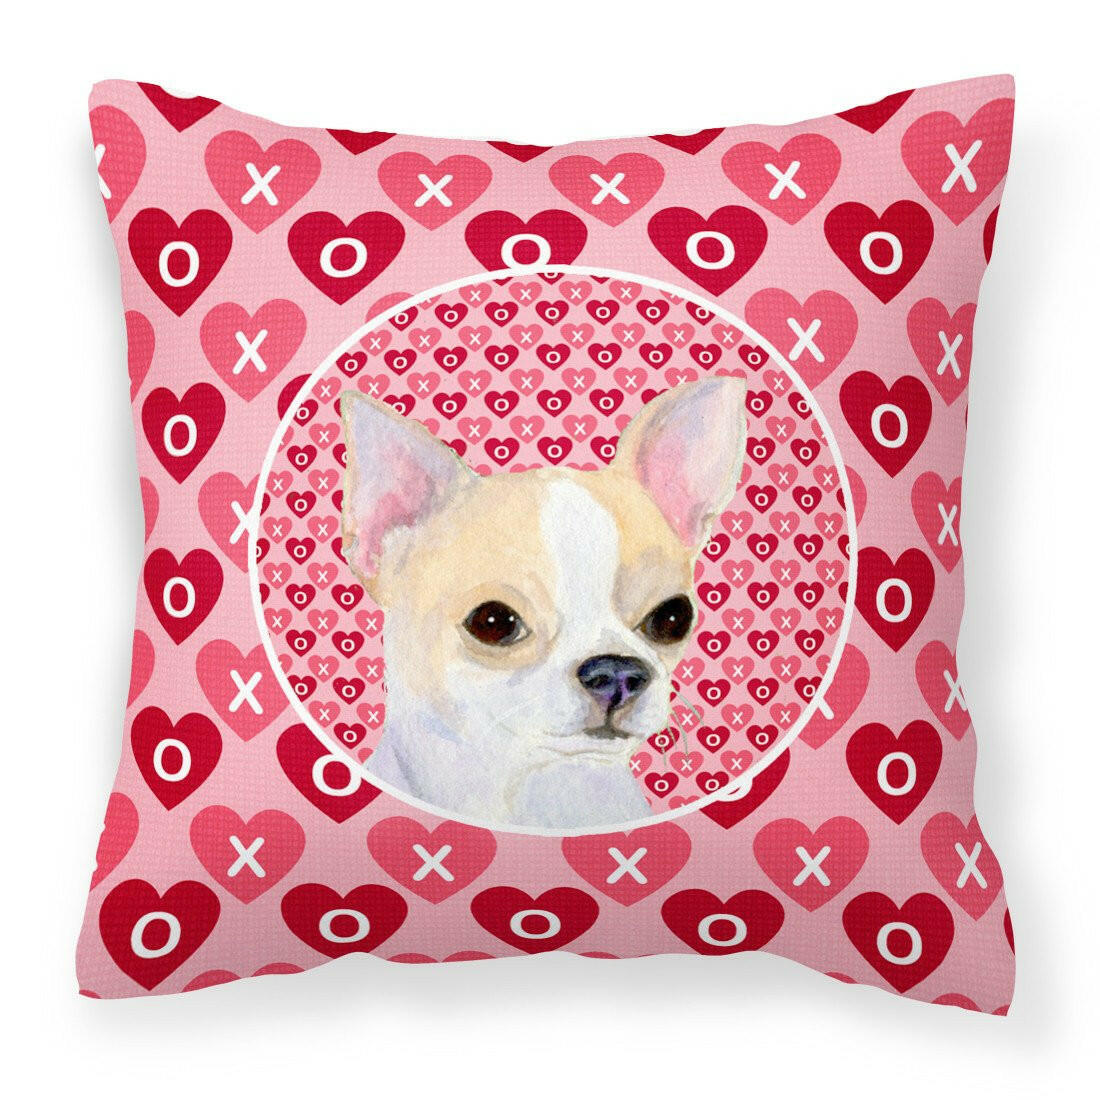 Chihuahua Hearts Love and Valentine's Day Portrait Fabric Decorative Pillow SS4474PW1414 by Caroline's Treasures